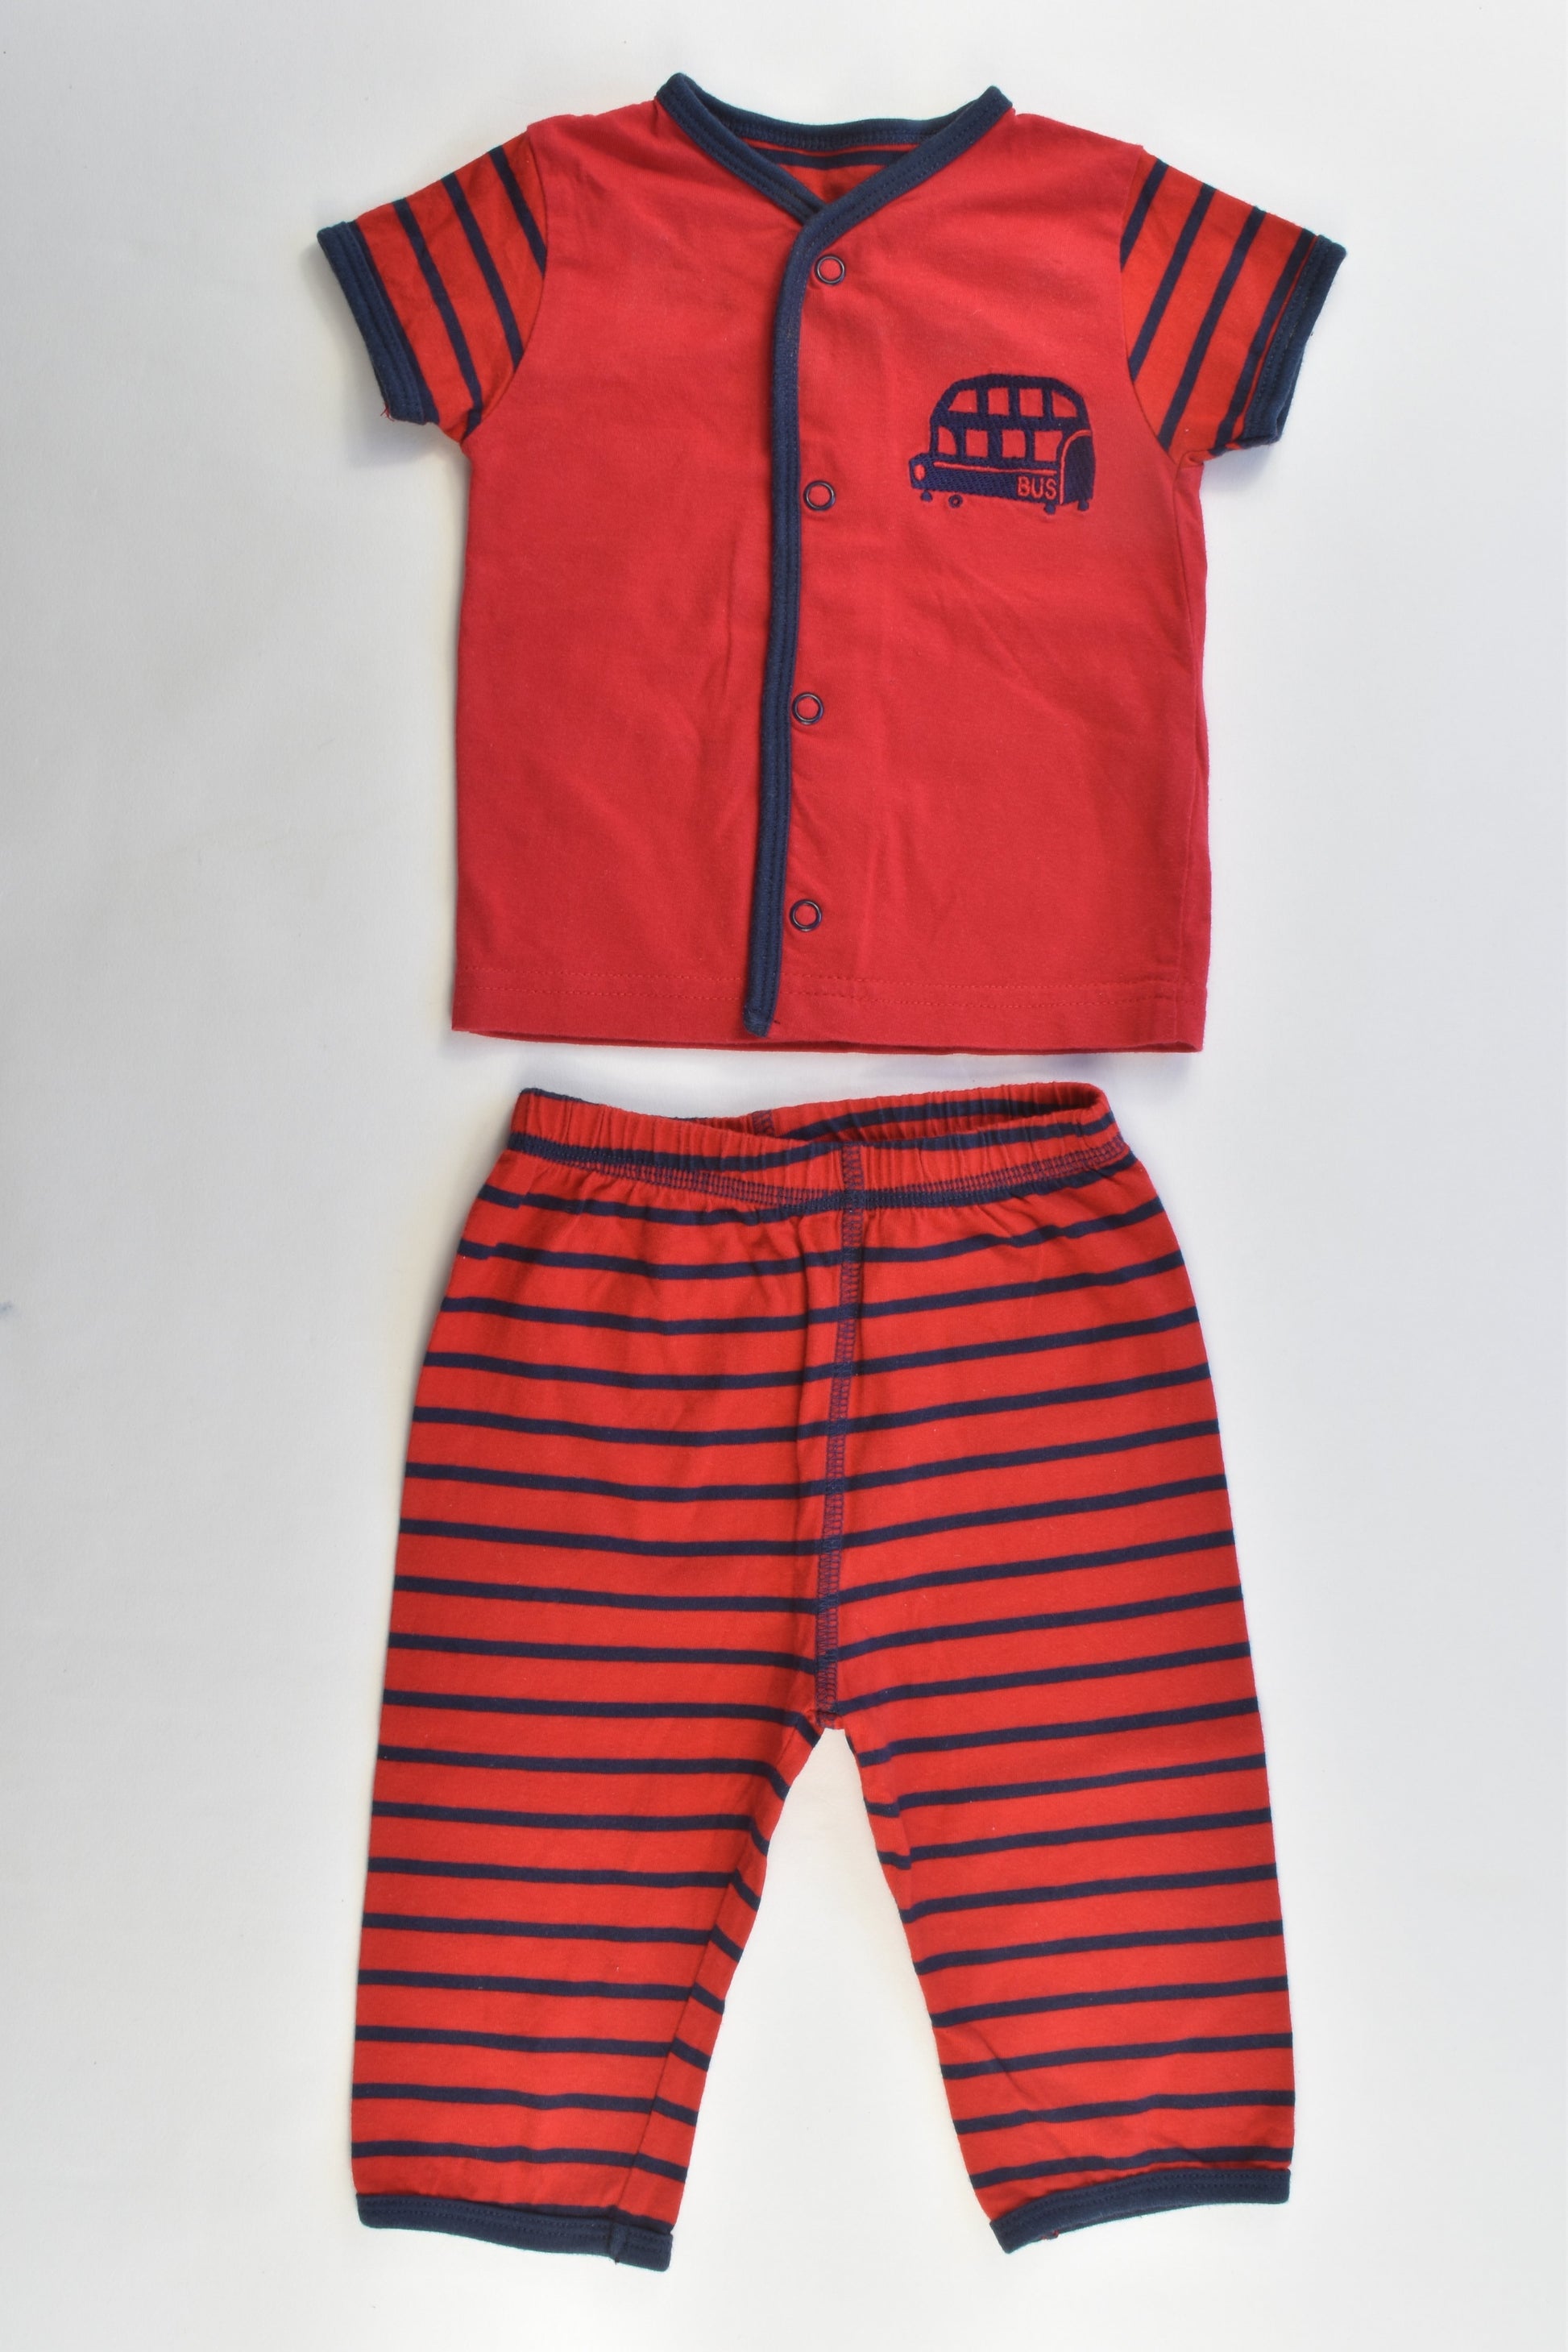 Mothercare Size 3-6 months (00) Red/Striped Bus Set